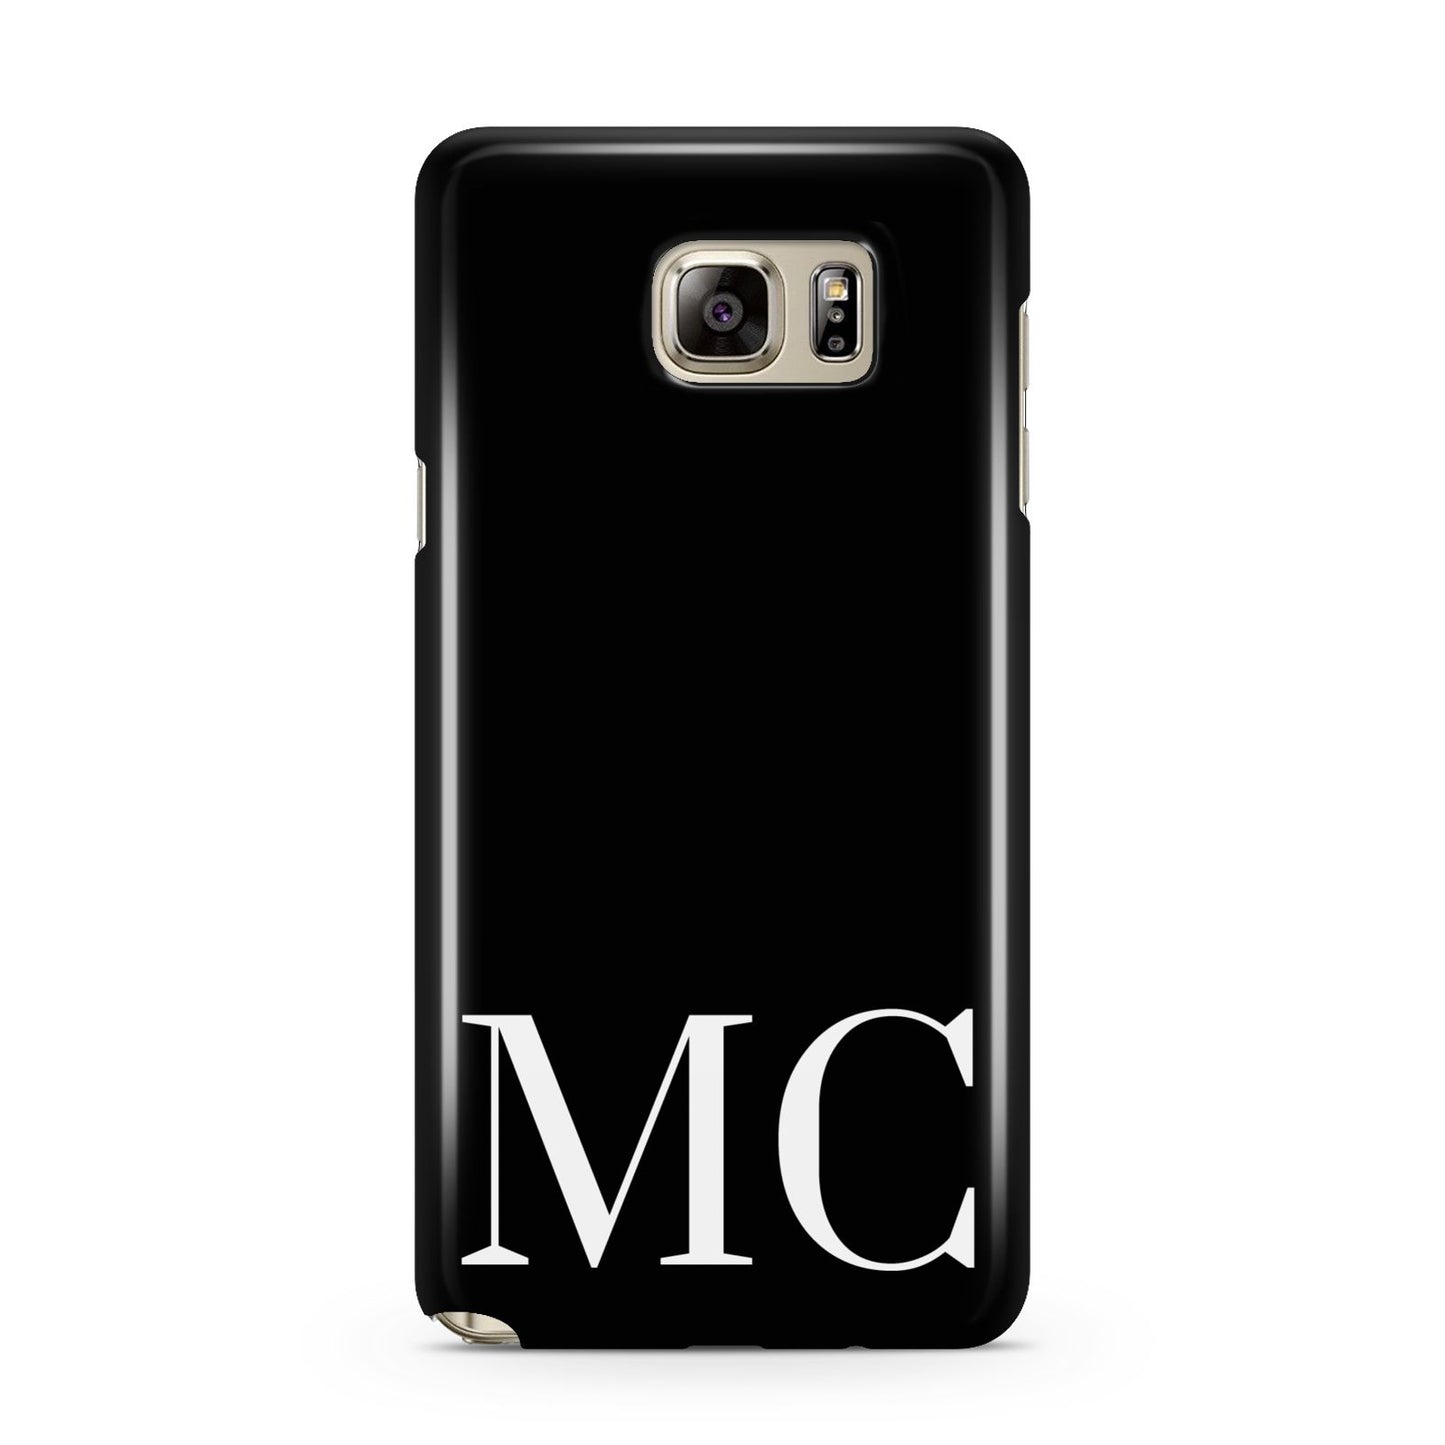 Initials Personalised 1 Samsung Galaxy Note 5 Case